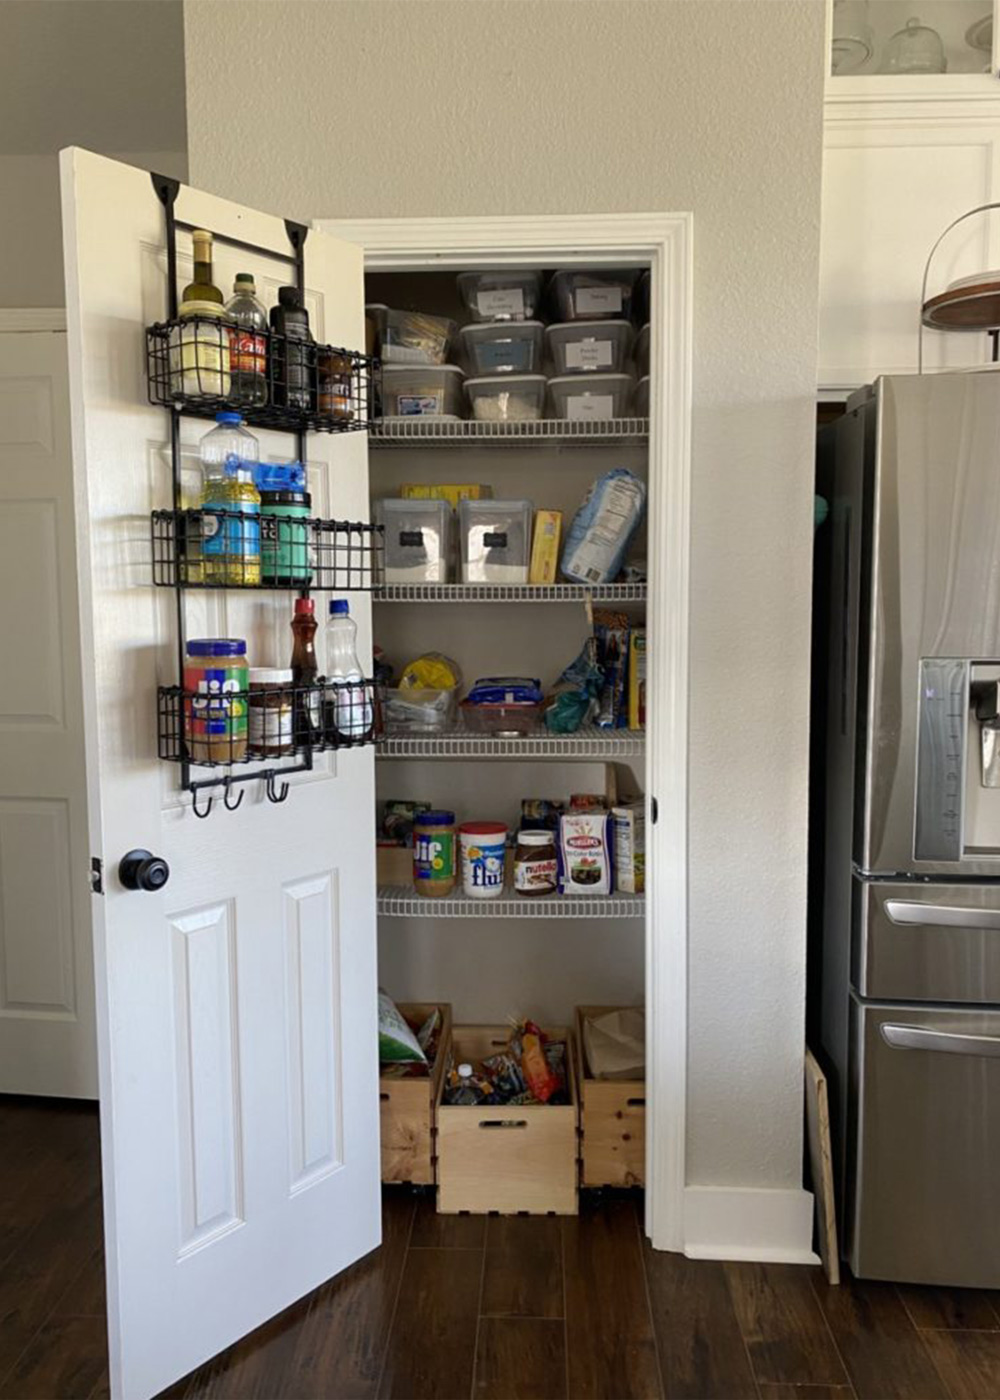 How to build a kitchen pantry closet - Houzewize %